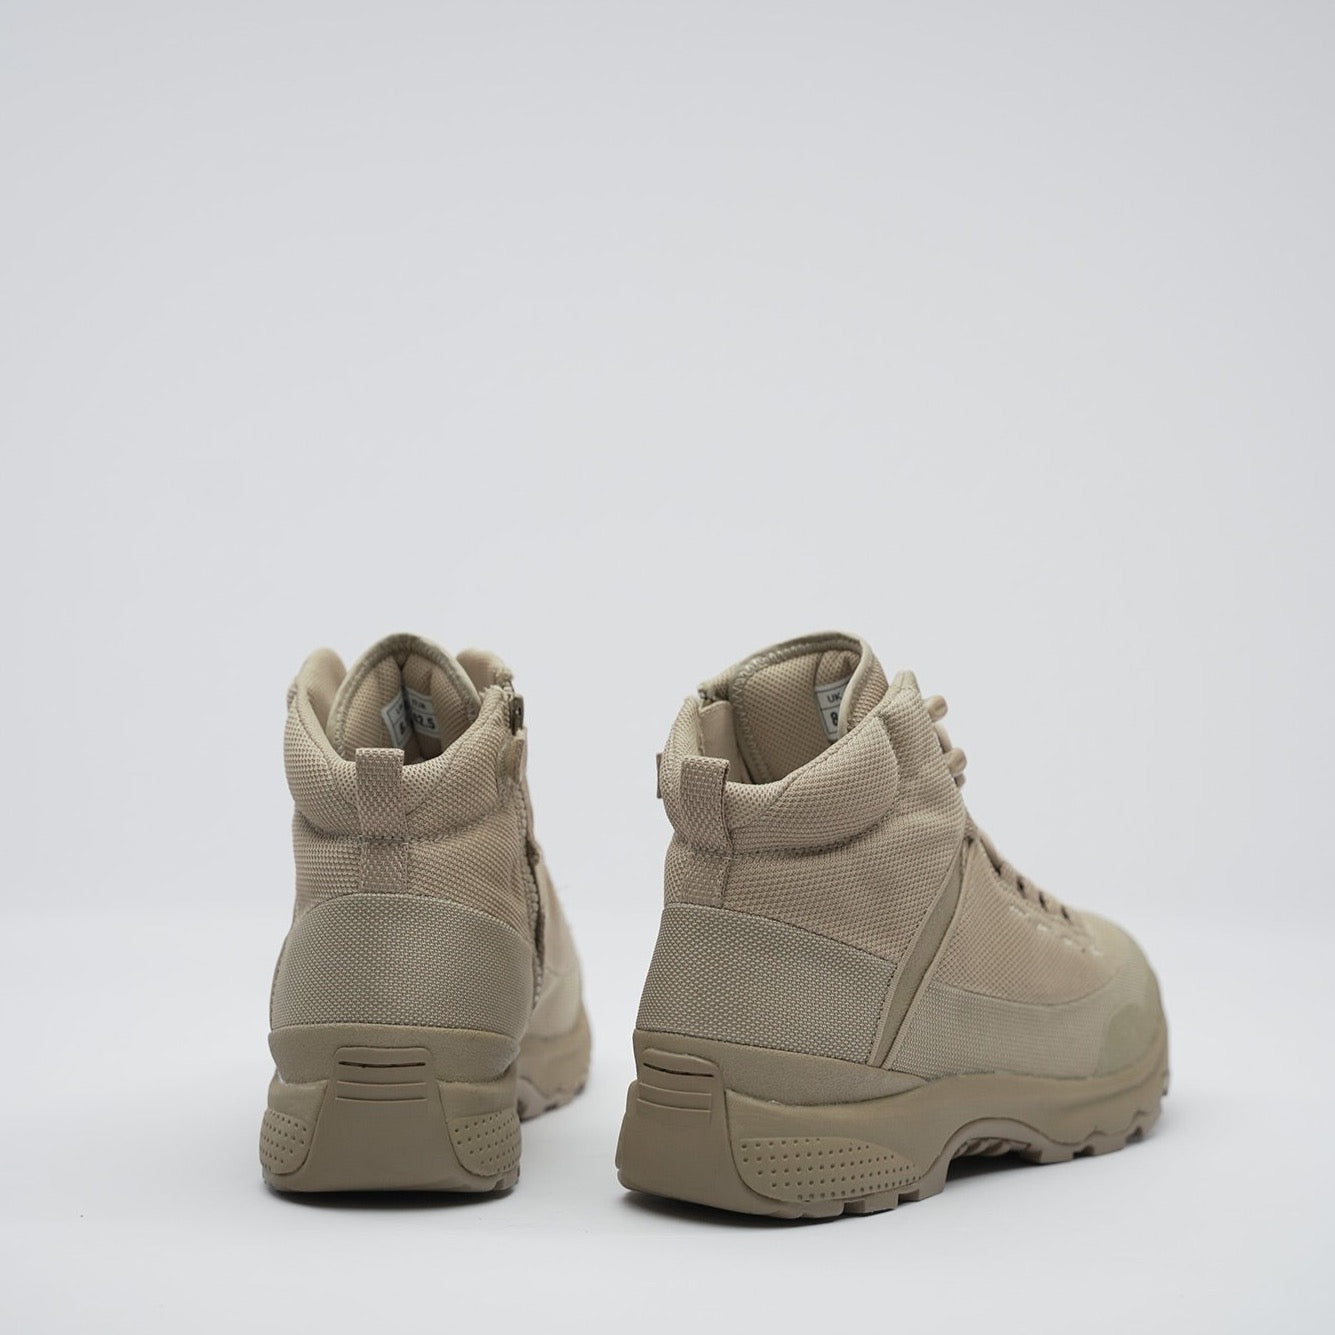 high top canvas tactical boots designed for comfort